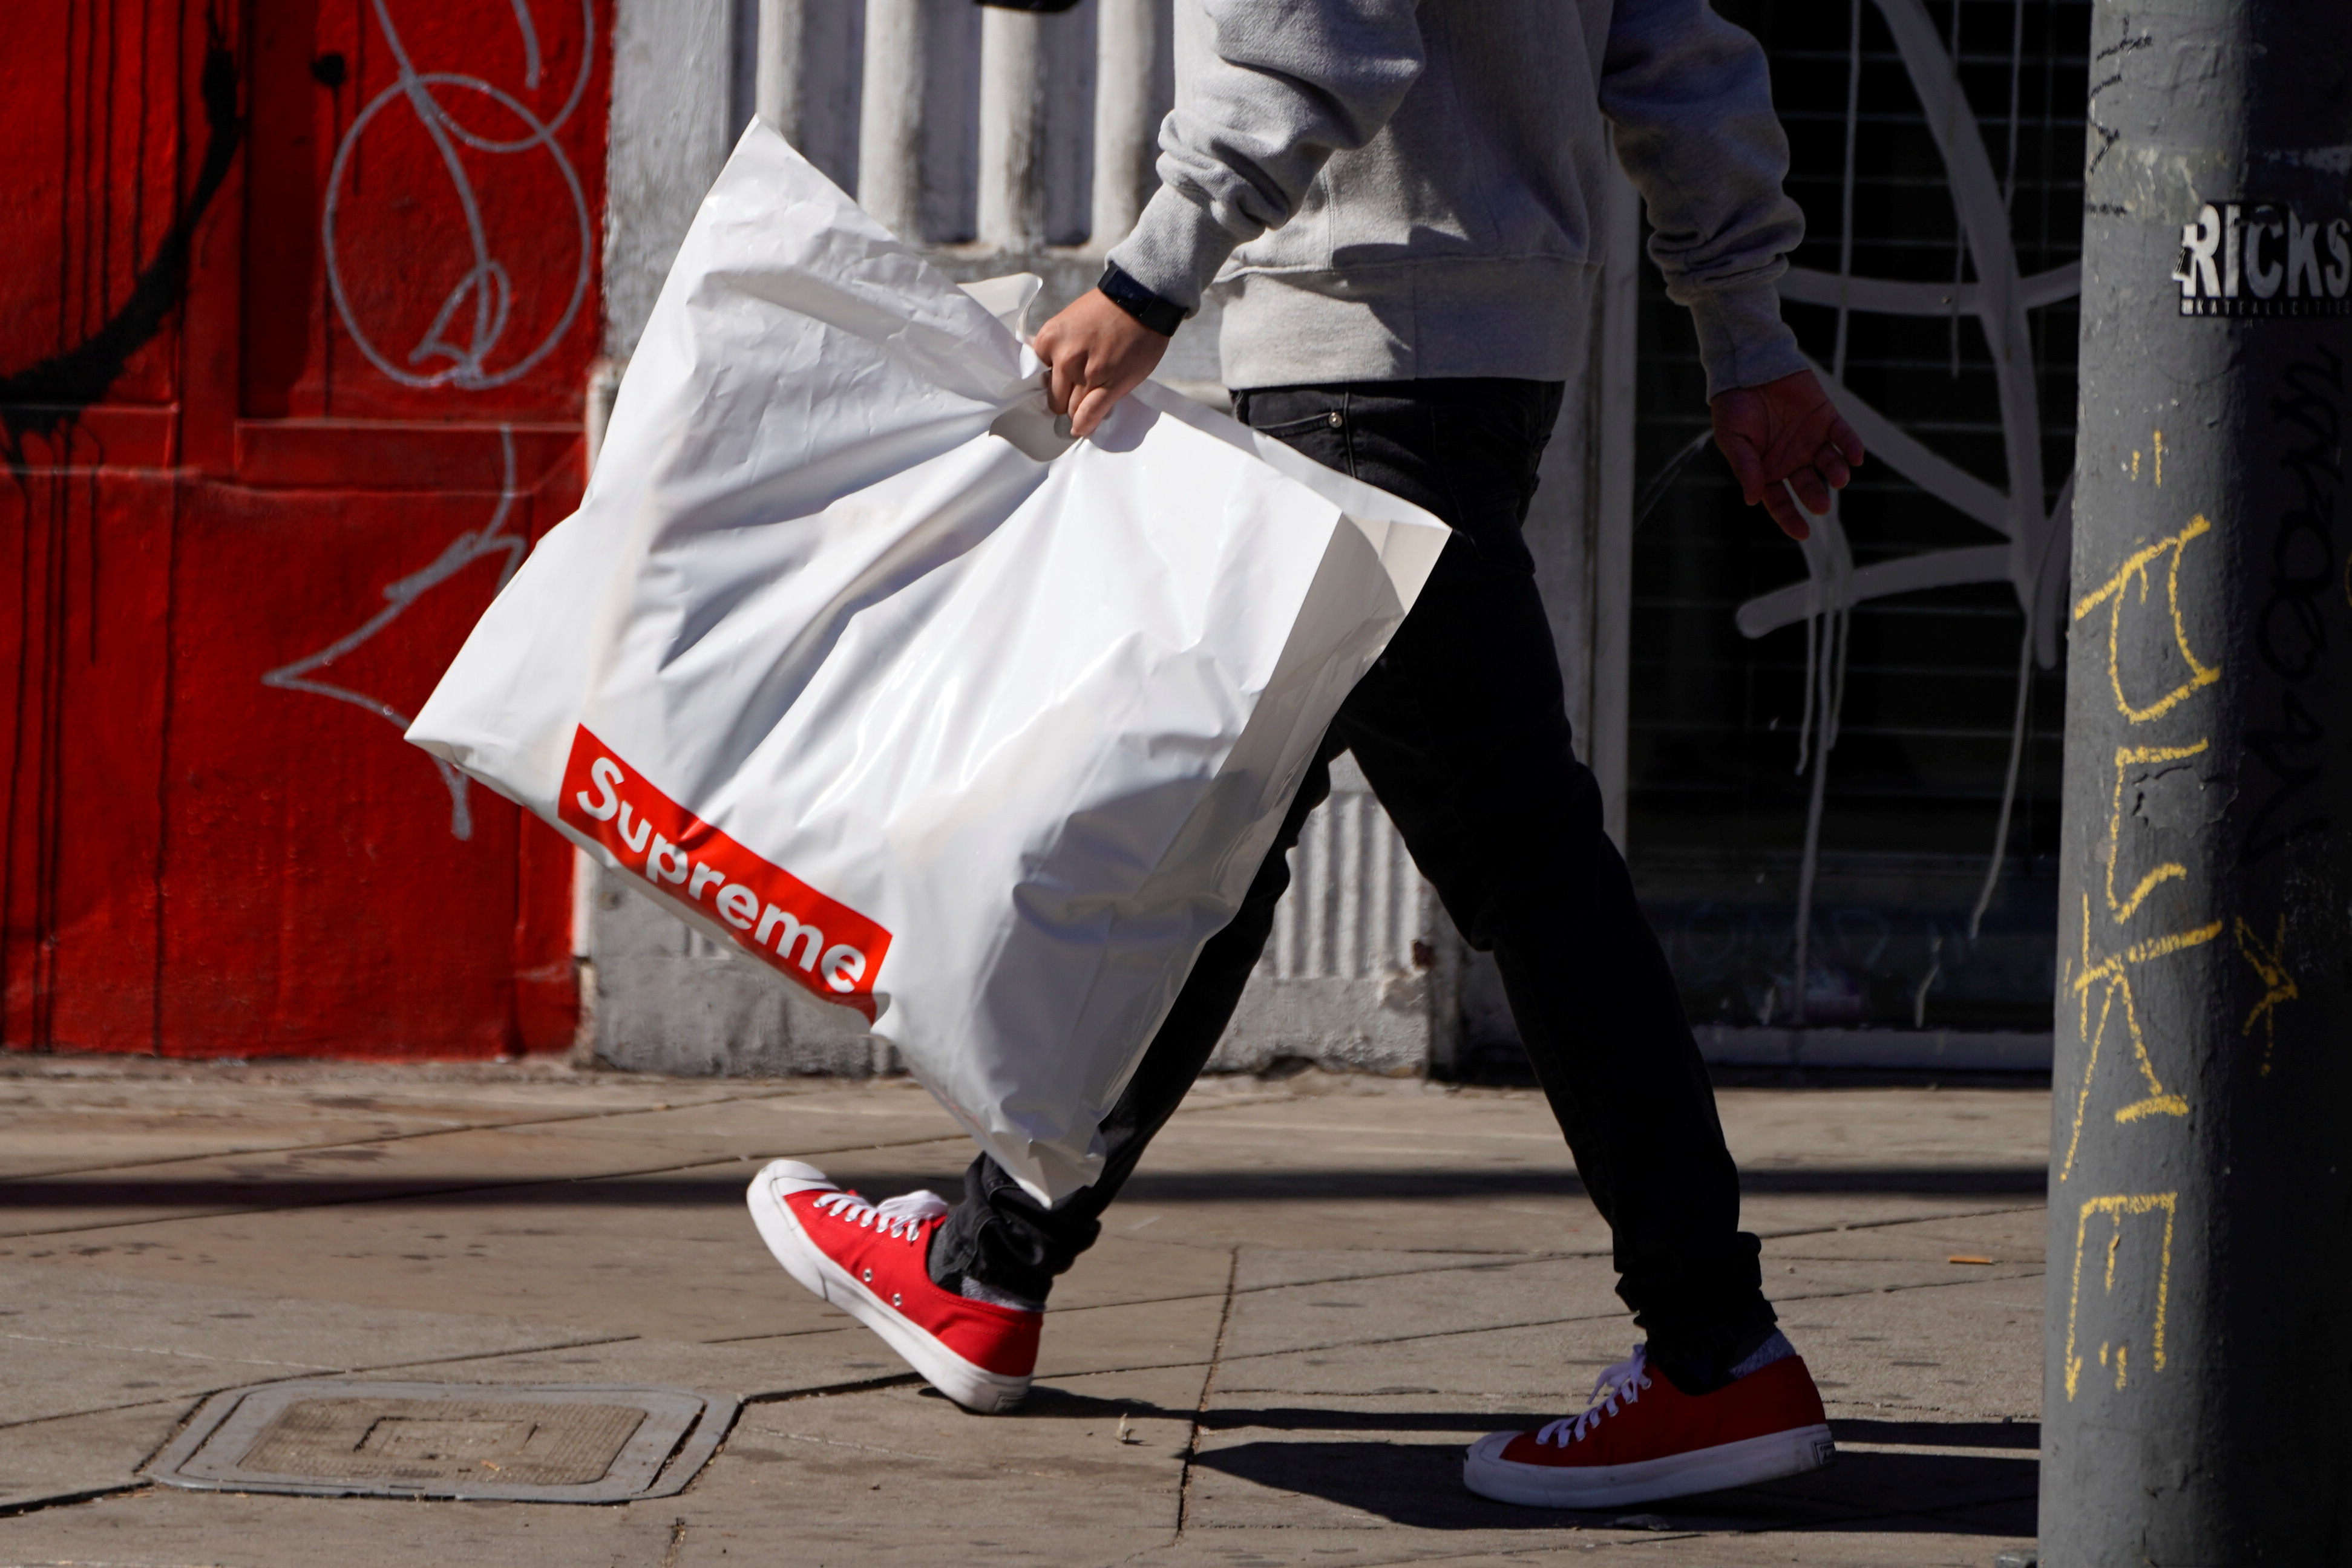 Supreme Acquired by VF Corporation